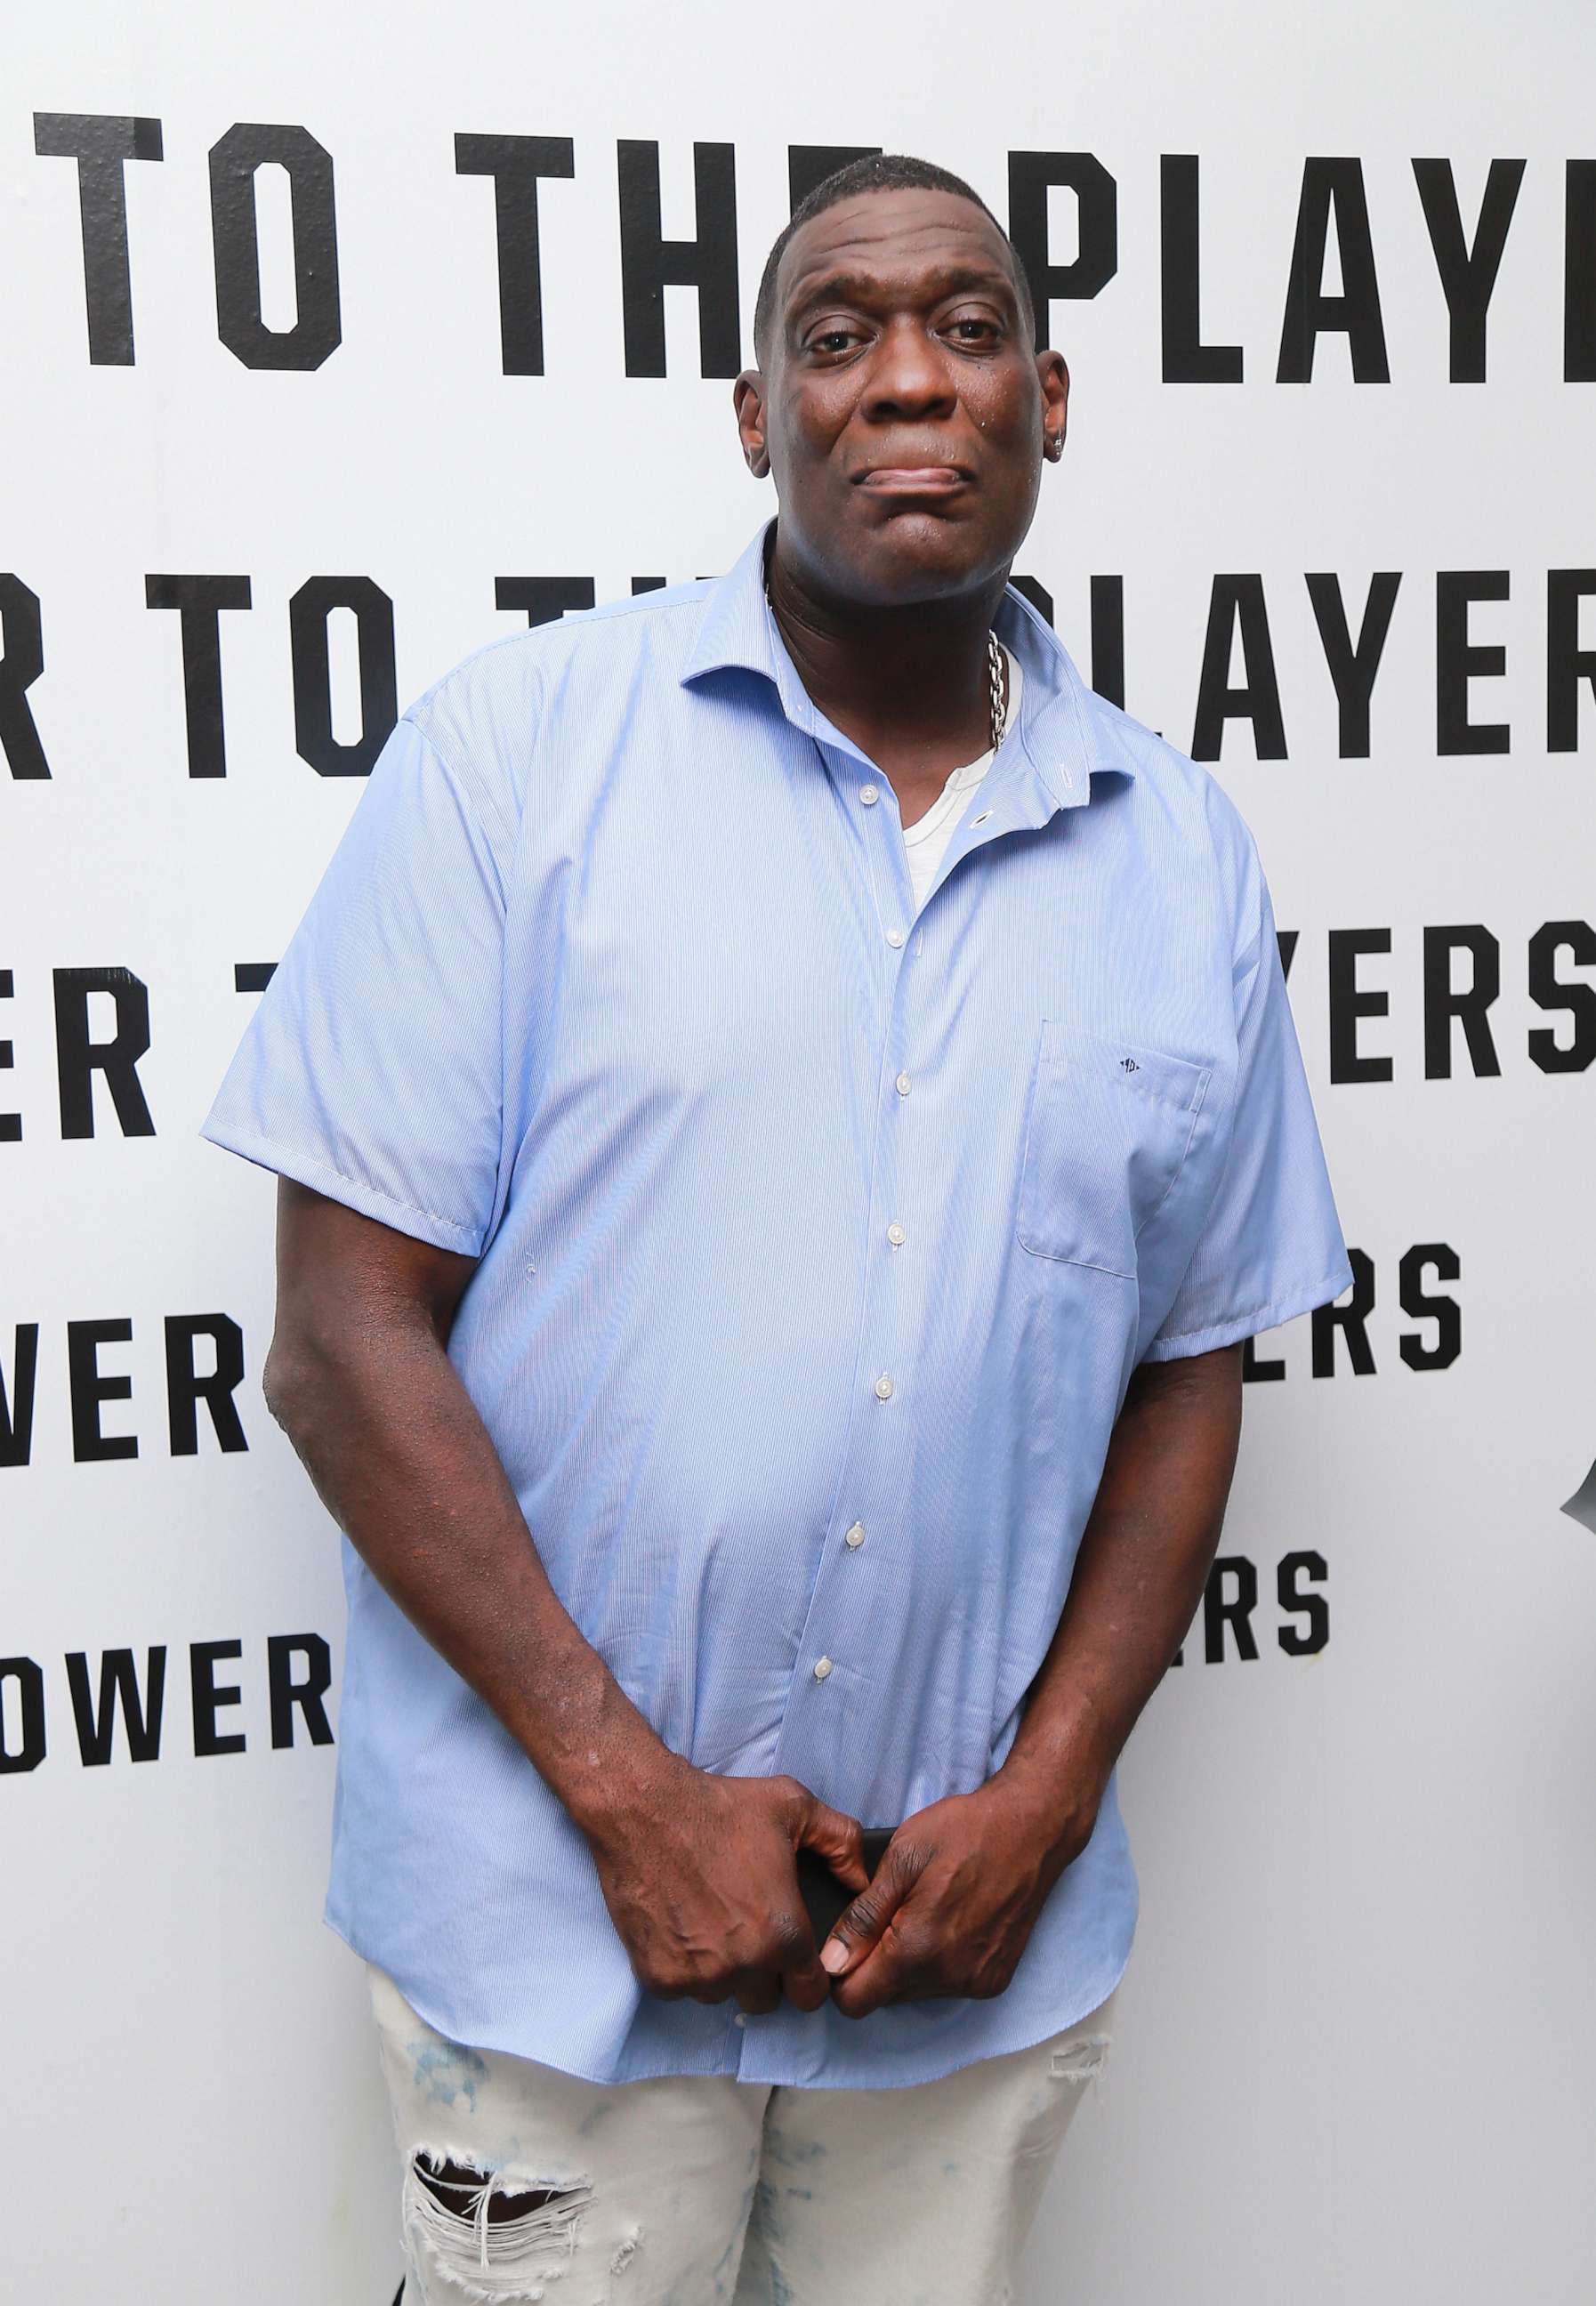 PHOTO: In this July 17, 2018 file photo Shawn Kemp attends Players' Night Out 2018 hosted by The Players' Tribune in Studio City, Calif.